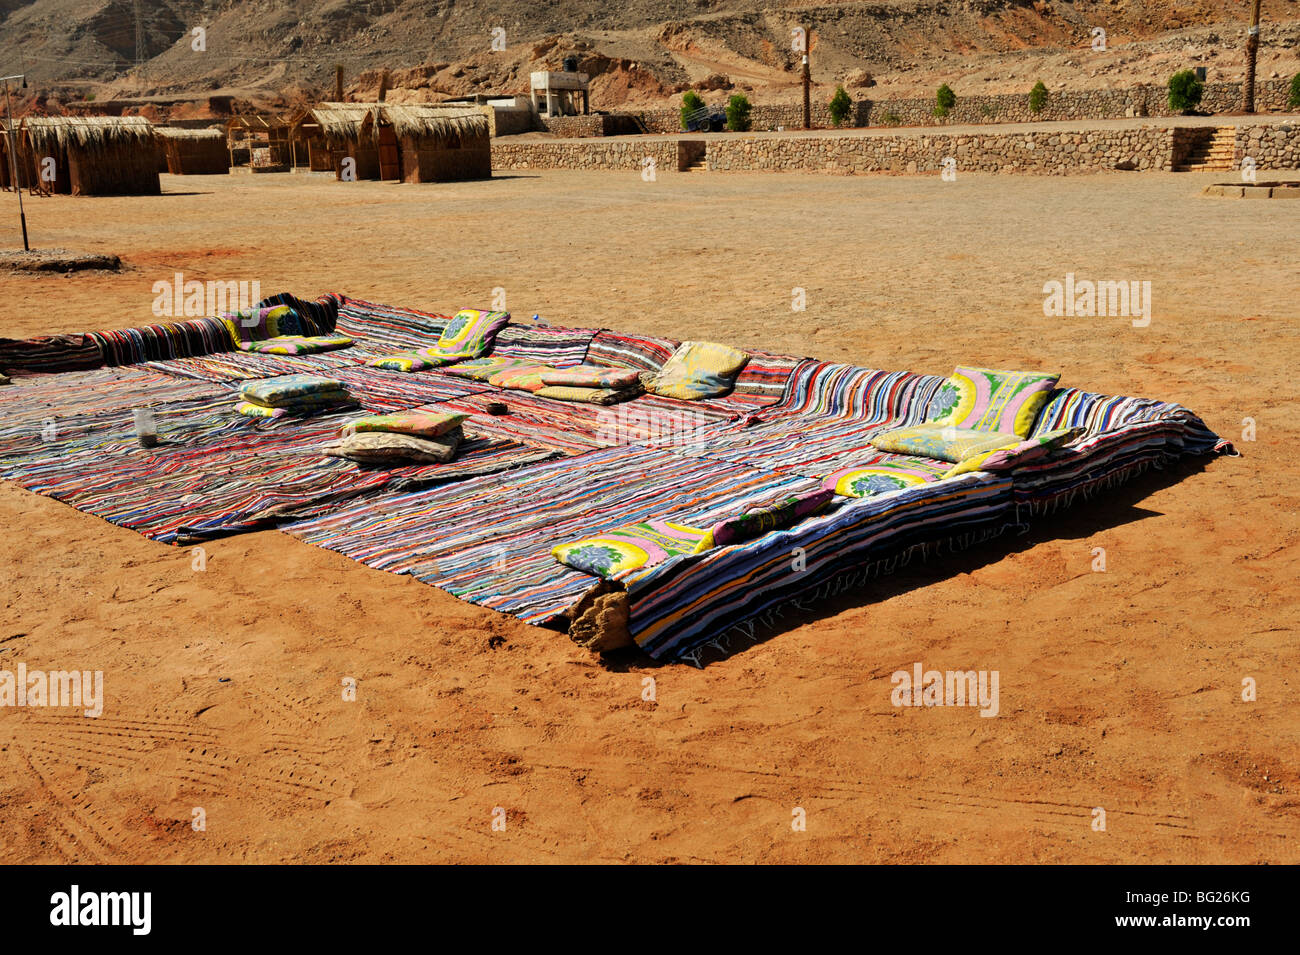 Bedouin tourist camp on the beach with carpets to rest on, Nuweiba, Sinai Egypt Stock Photo